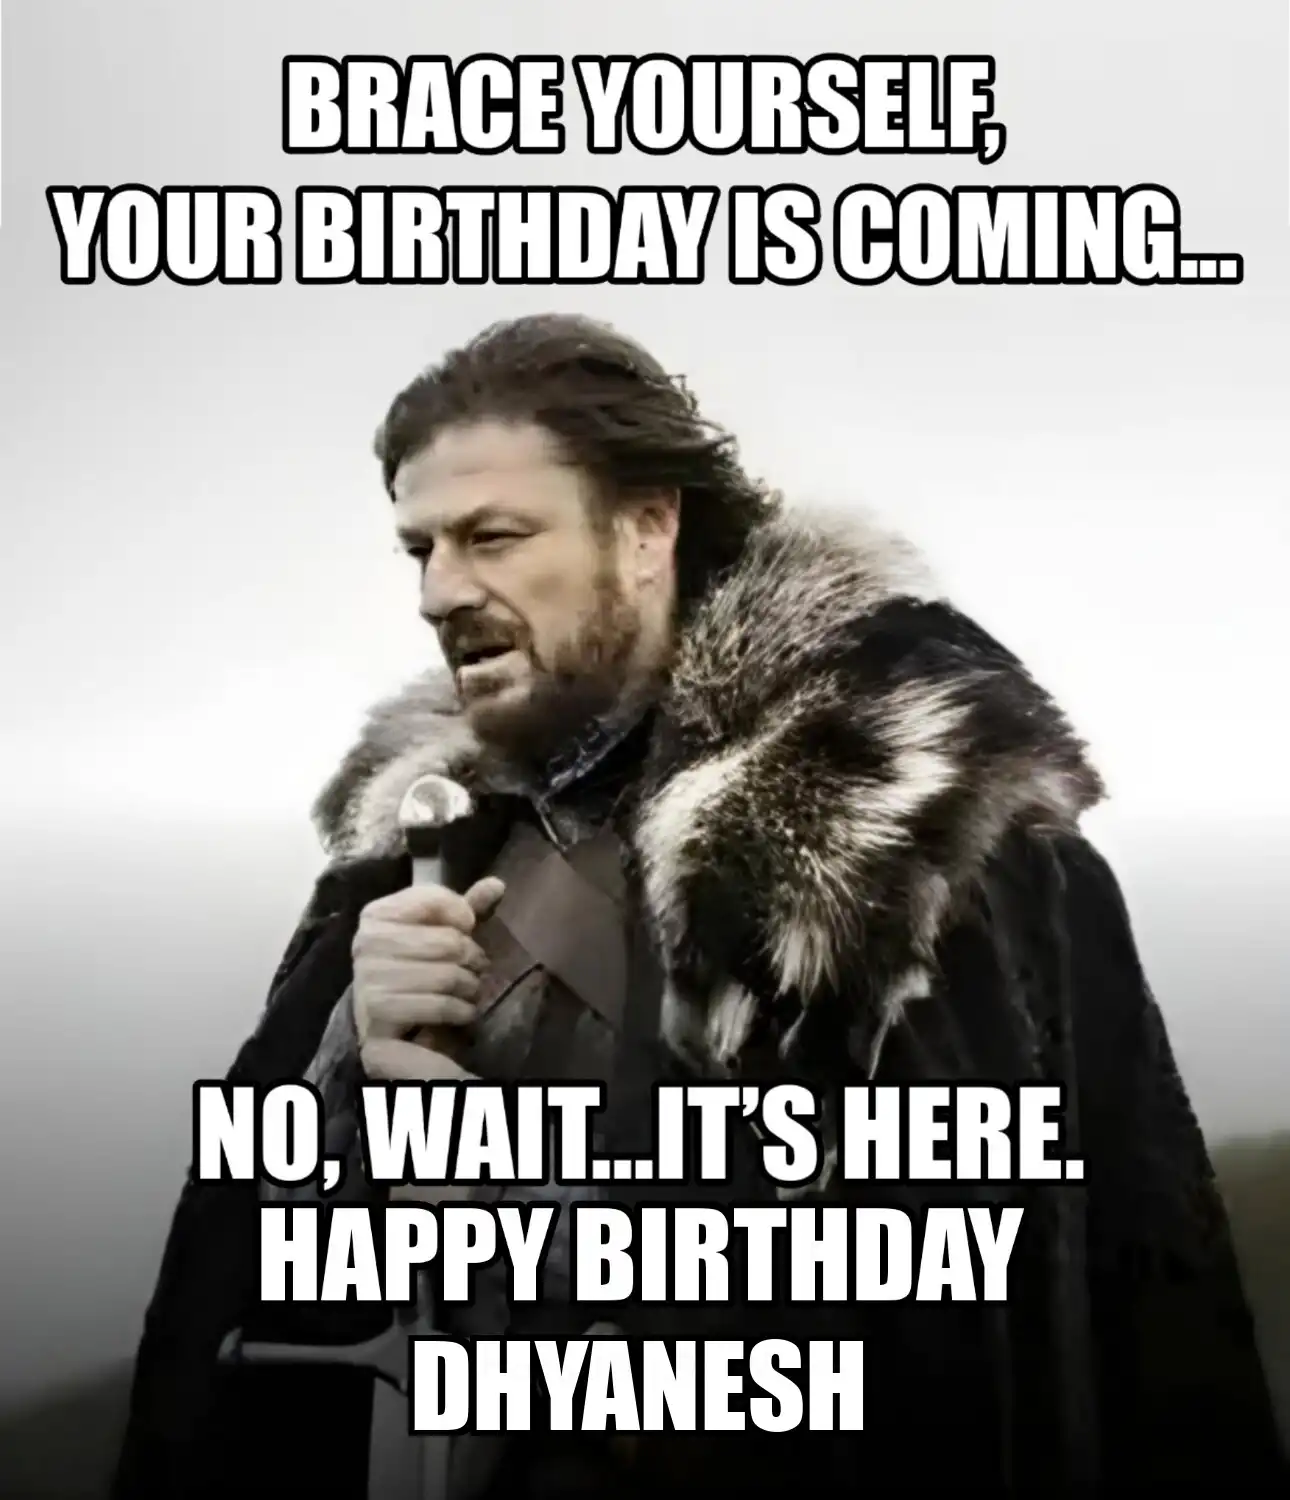 Happy Birthday Dhyanesh Brace Yourself Your Birthday Is Coming Meme